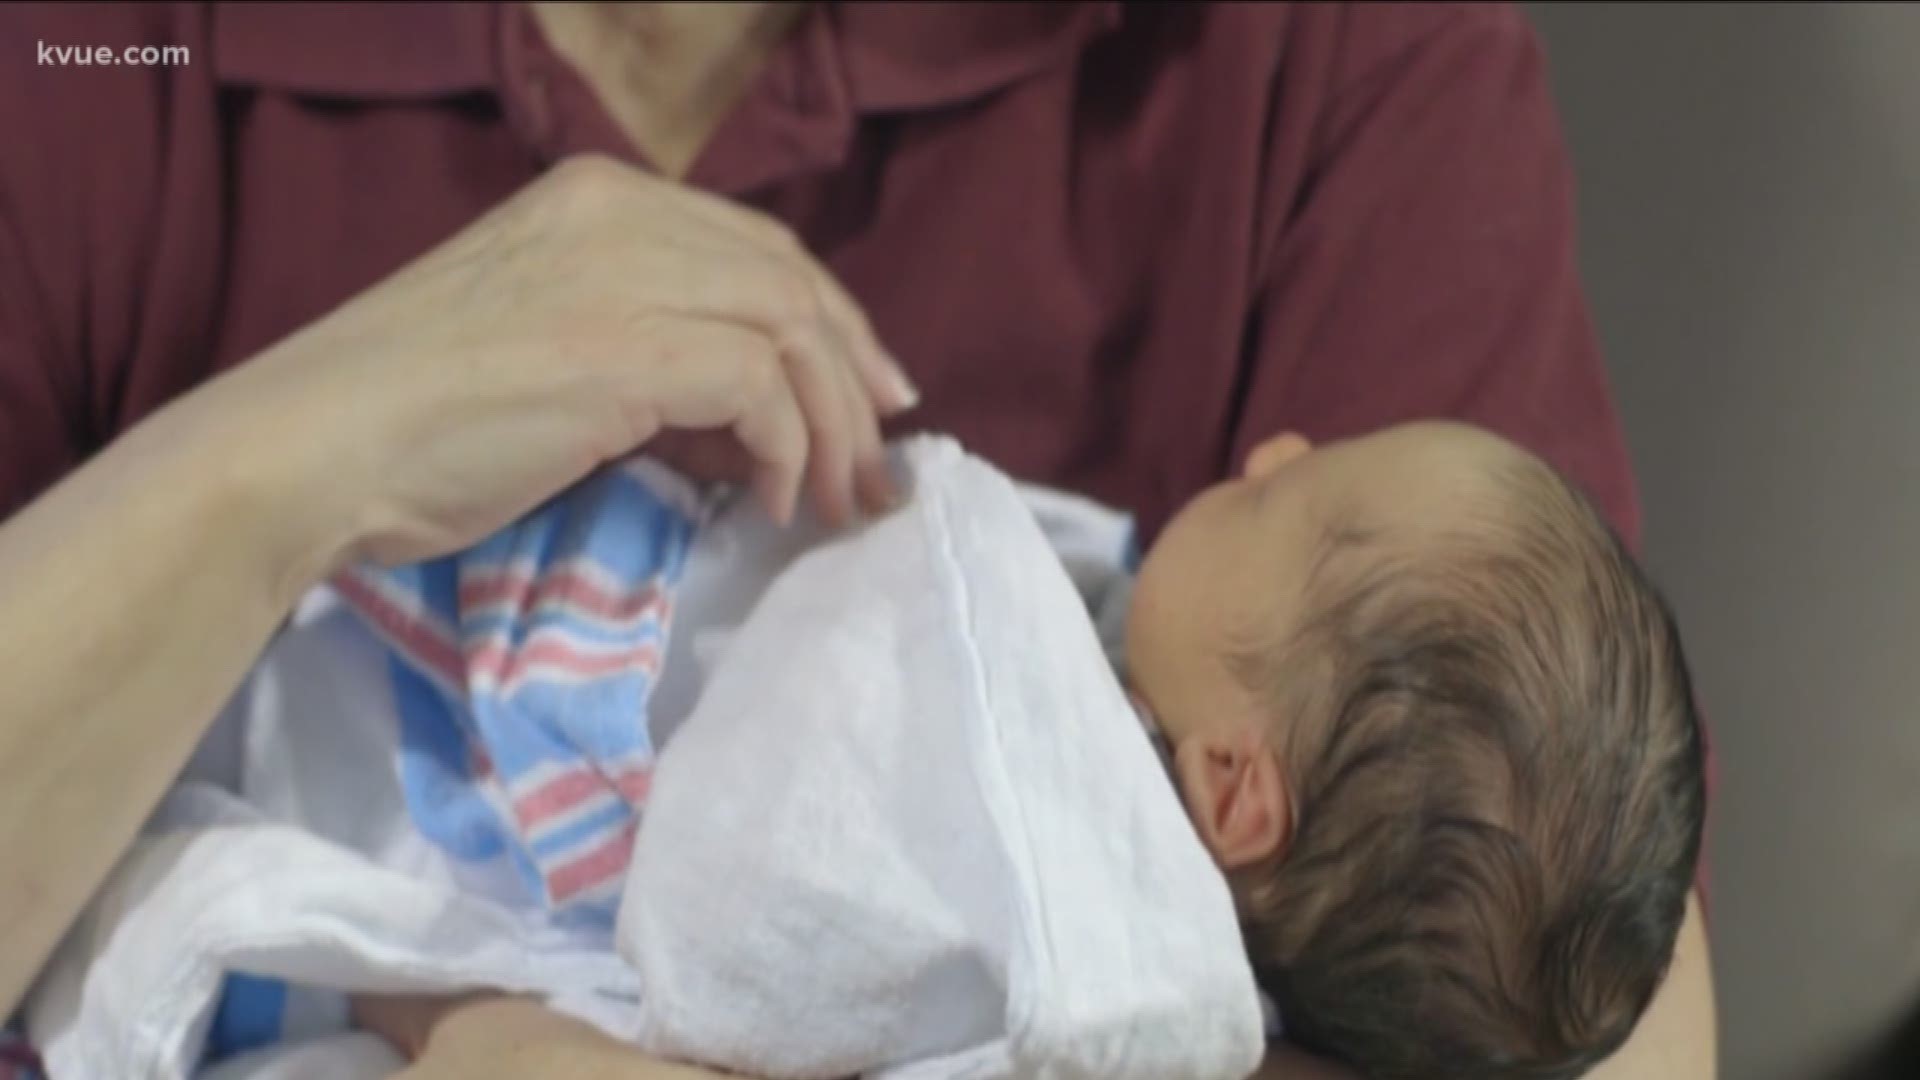 It’s National Breastfeeding Month and joining KVUE to talk about breastfeeding and benefits available to new moms at St. David’s Women’s Center of Texas is Cindy Warner. She’s a board-certified lactation consultant.